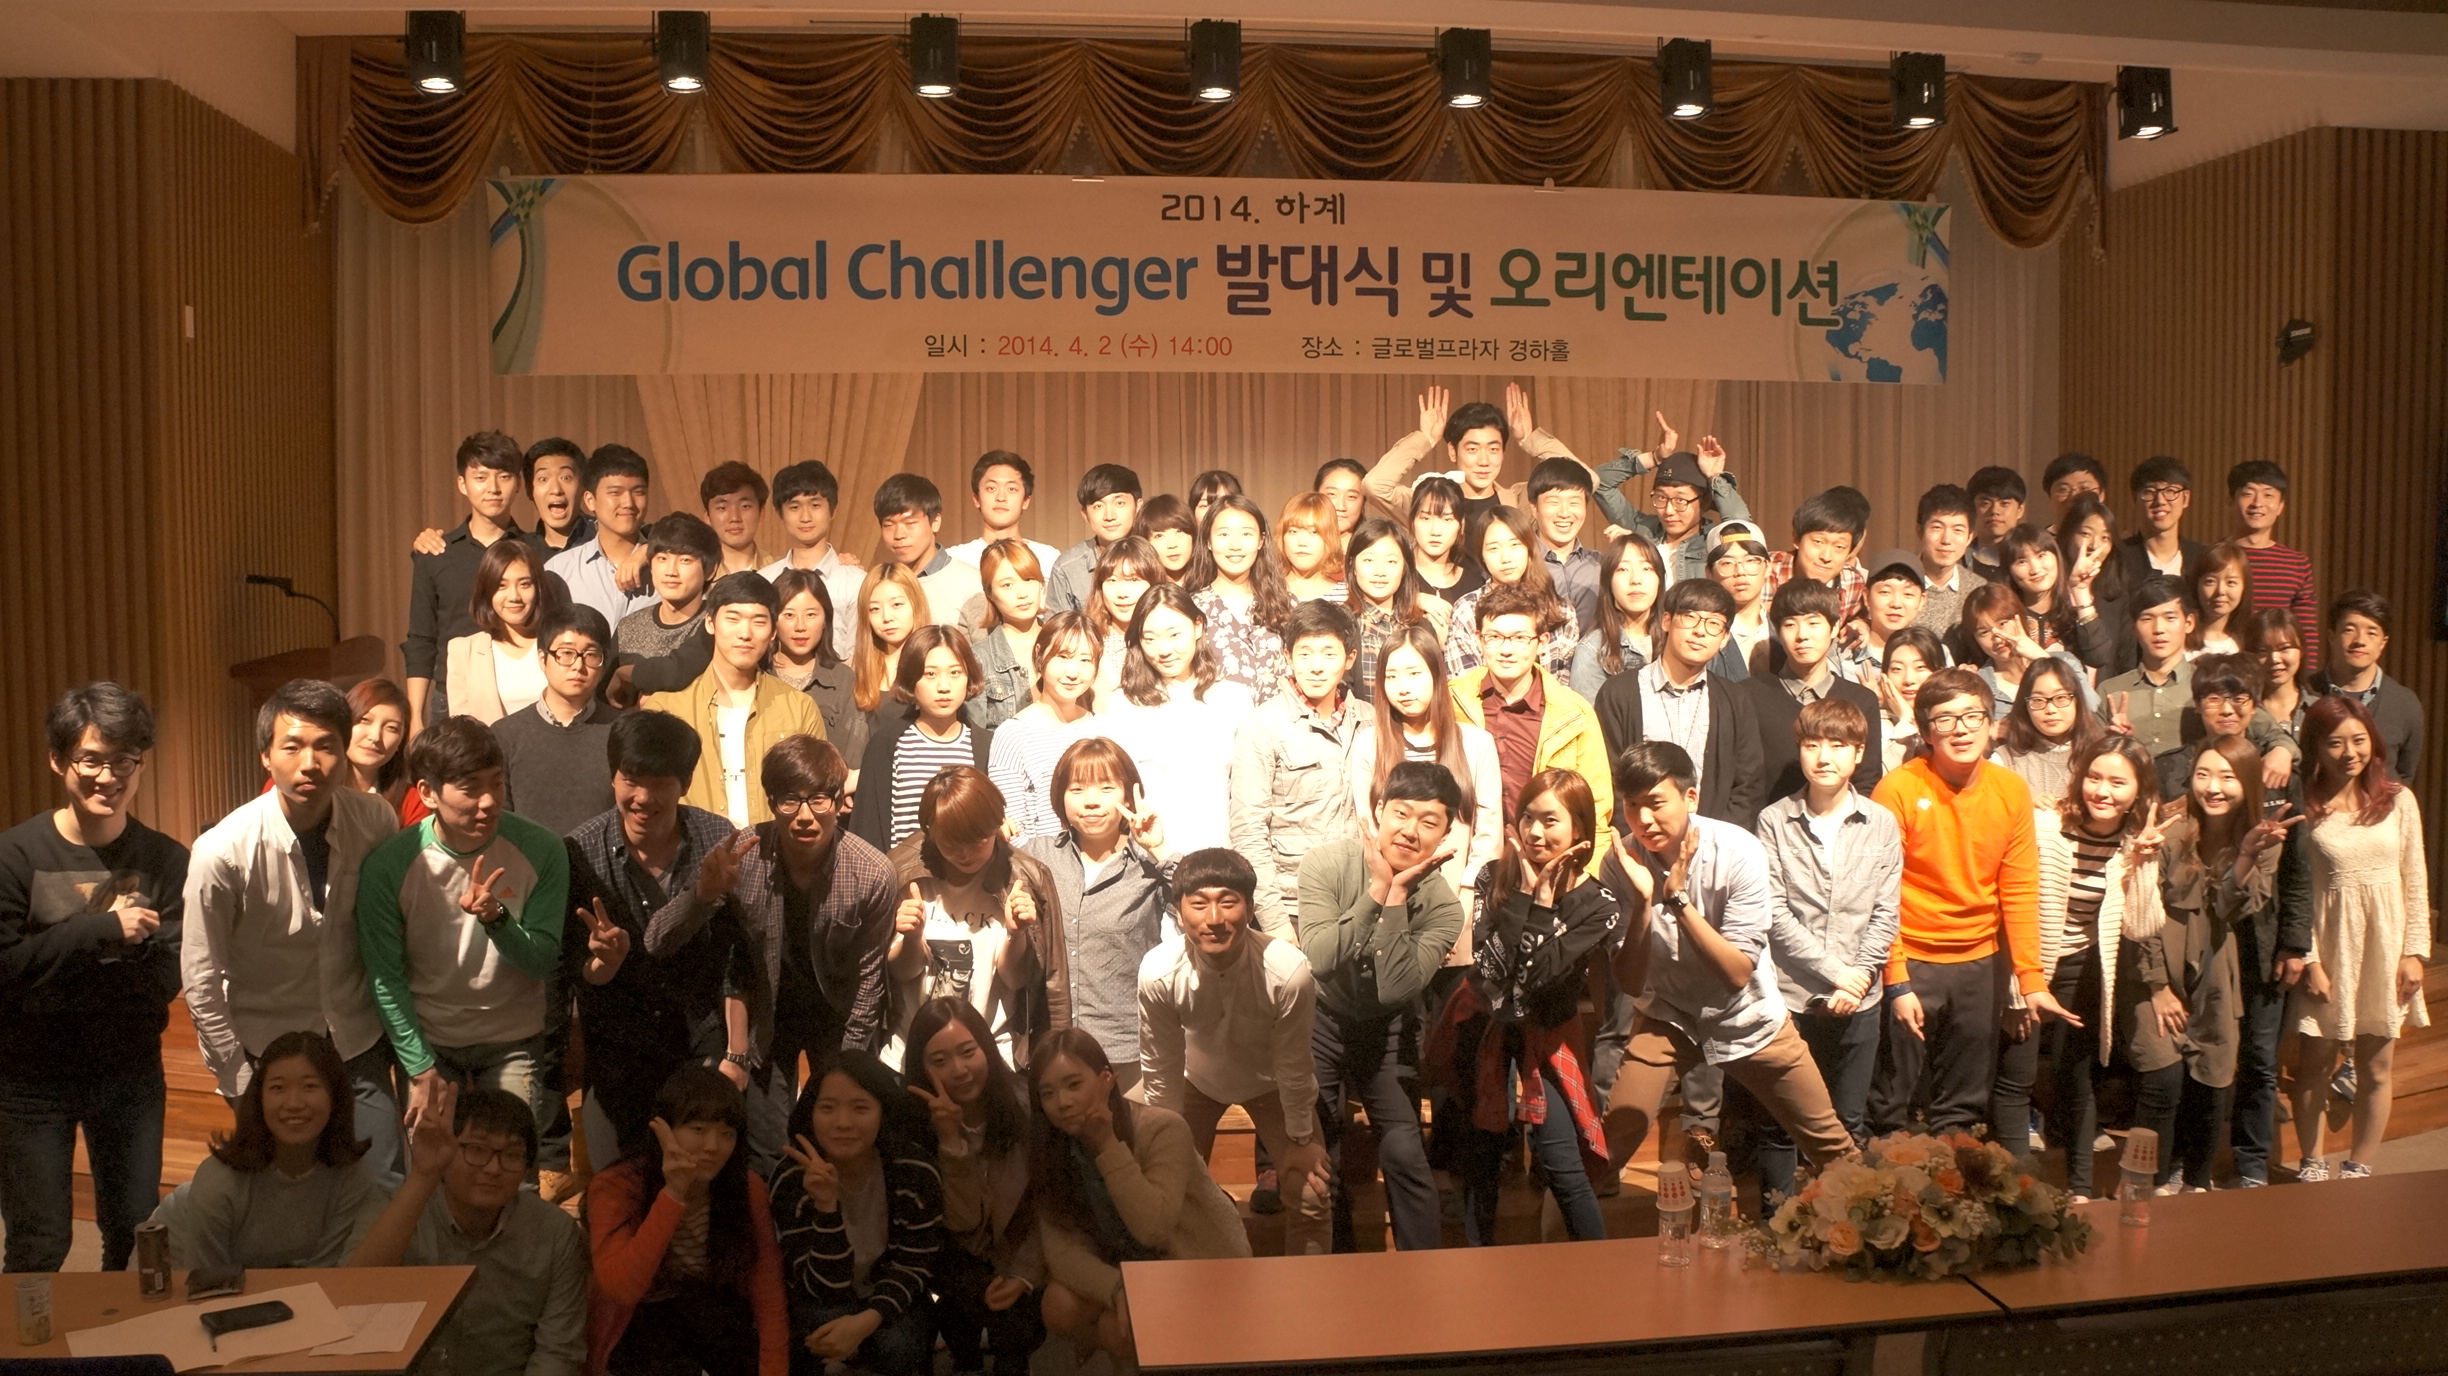 Orientation for 2014.Summer Global Challenger 관련 이미지입니다